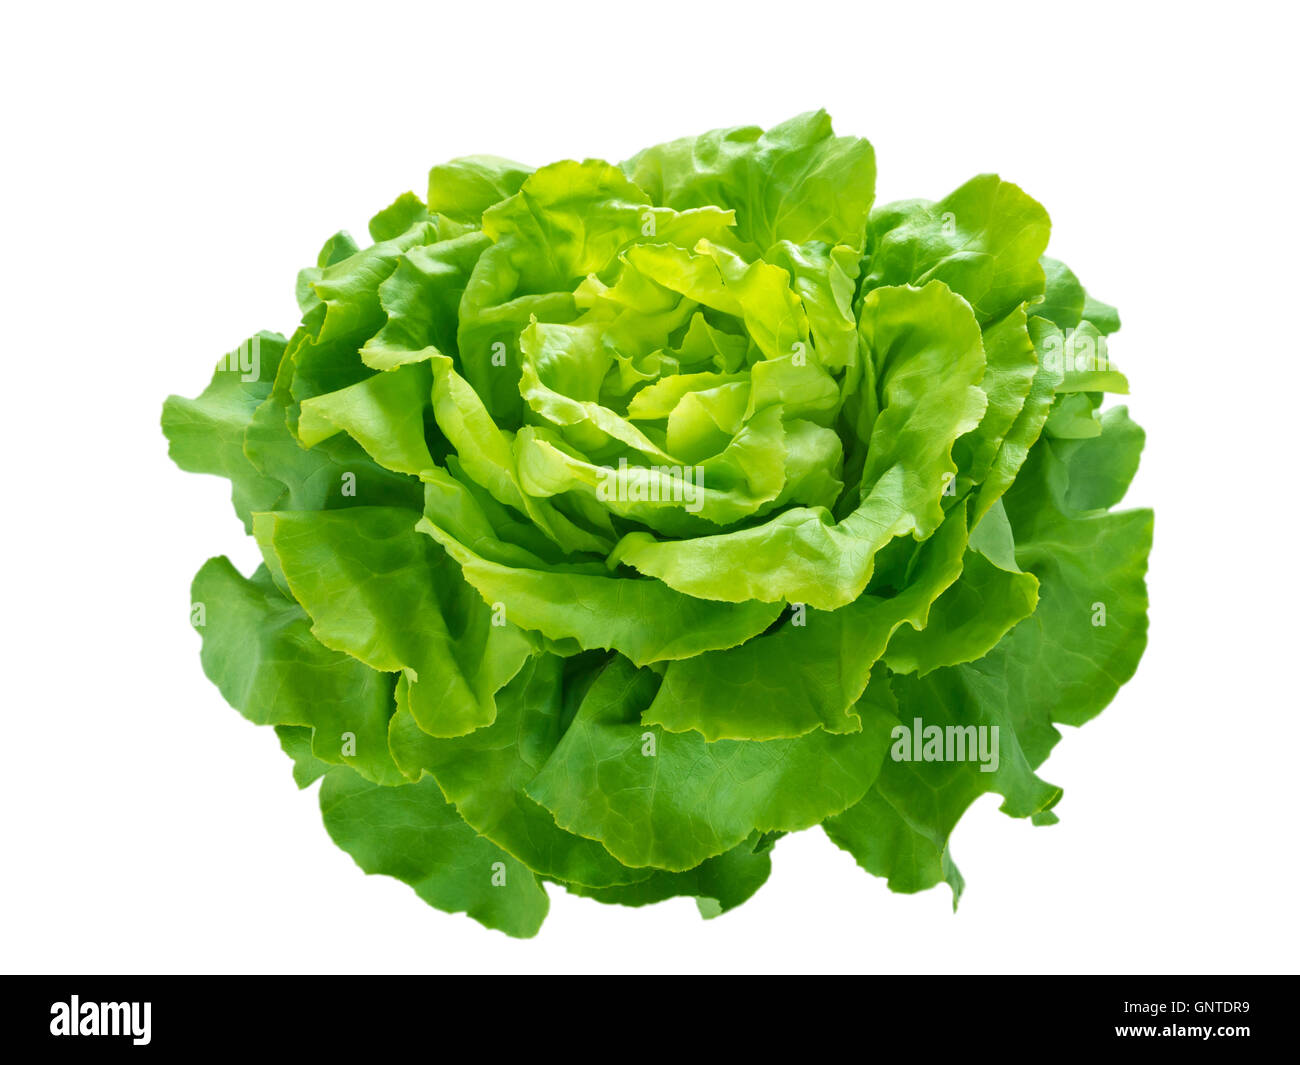 Green lettuce salad head isolated on white Stock Photo